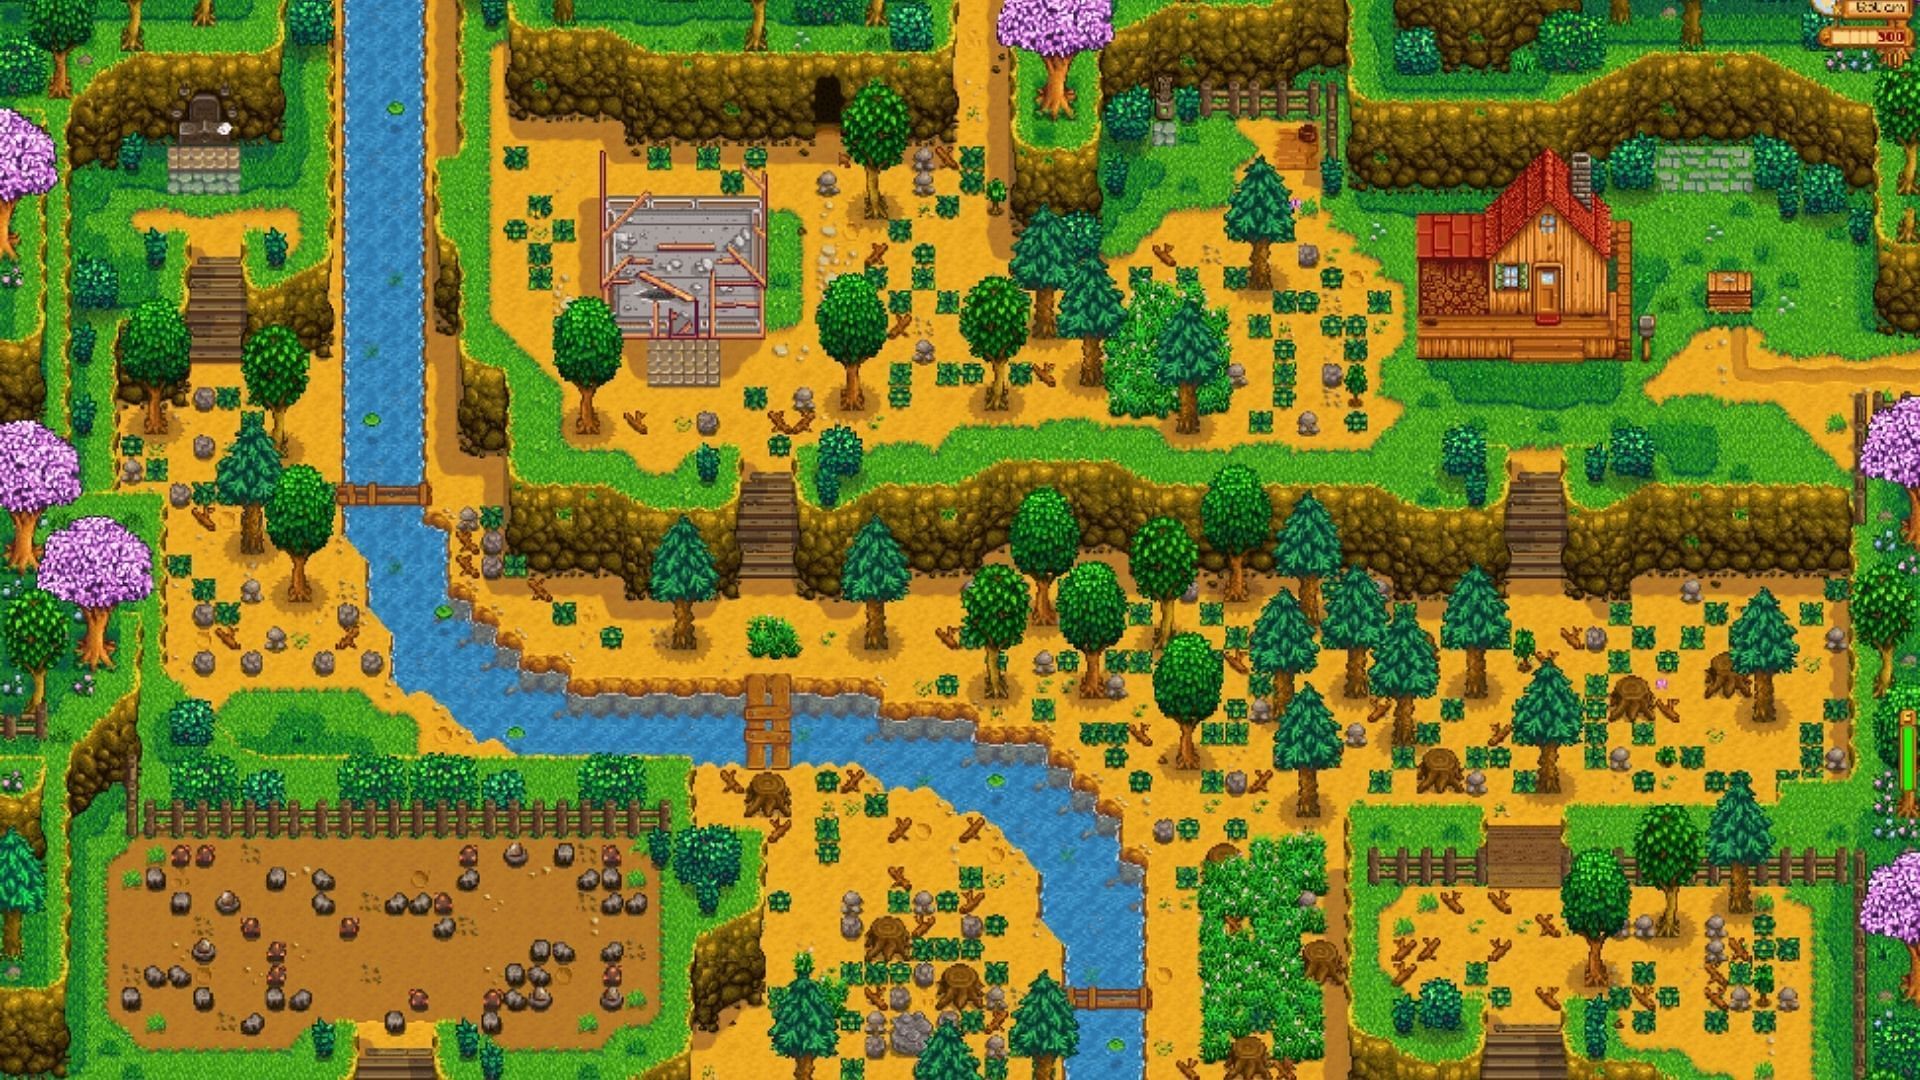 The Hill-top layout is great for mining but requires careful structure placement. (Image via ConcernedApe)